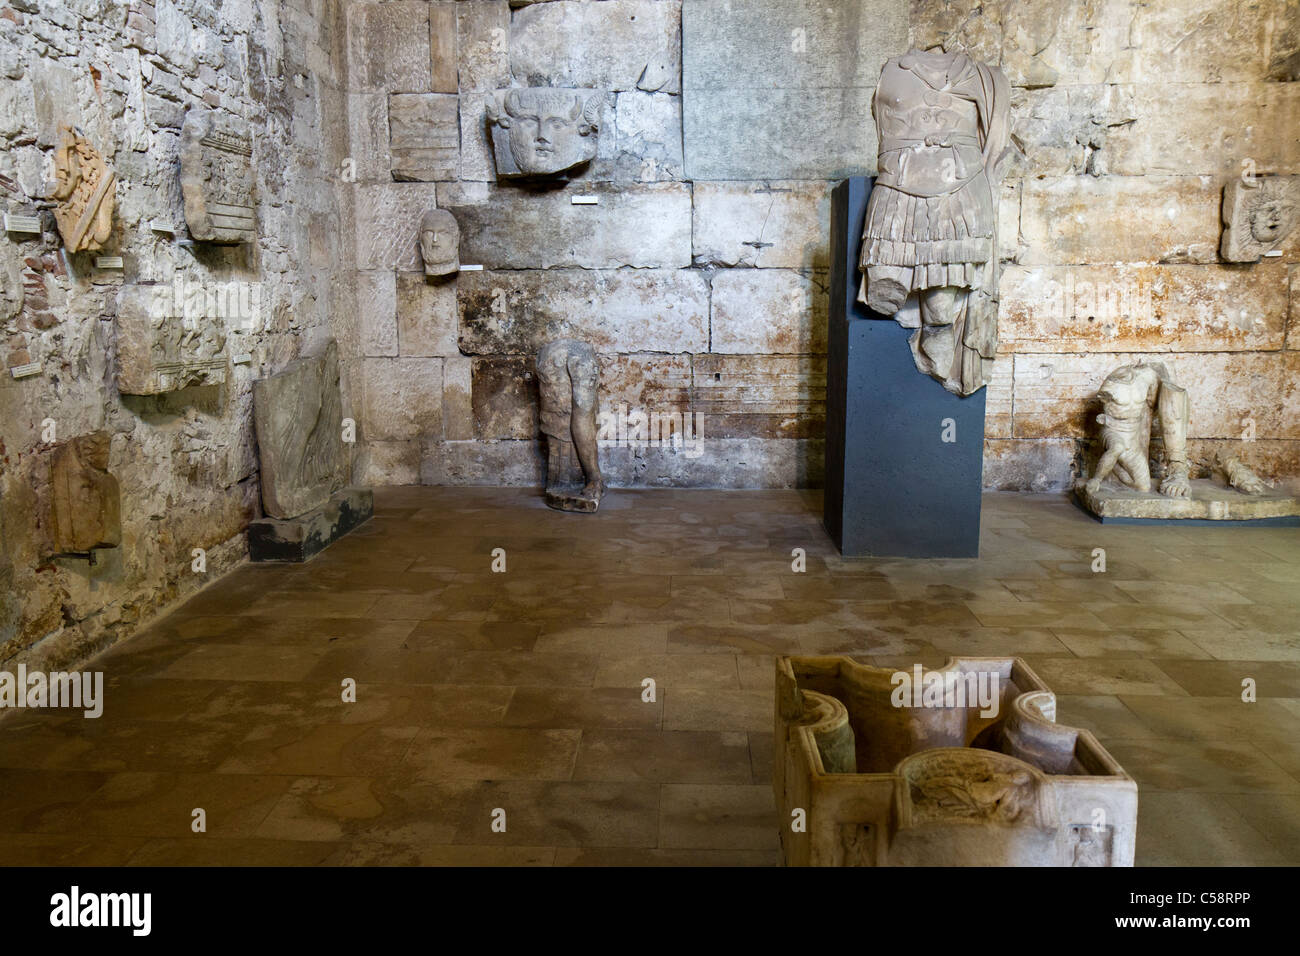 Antiquities on display within the Temple of Augustus at Pula, Croatia. Stock Photo